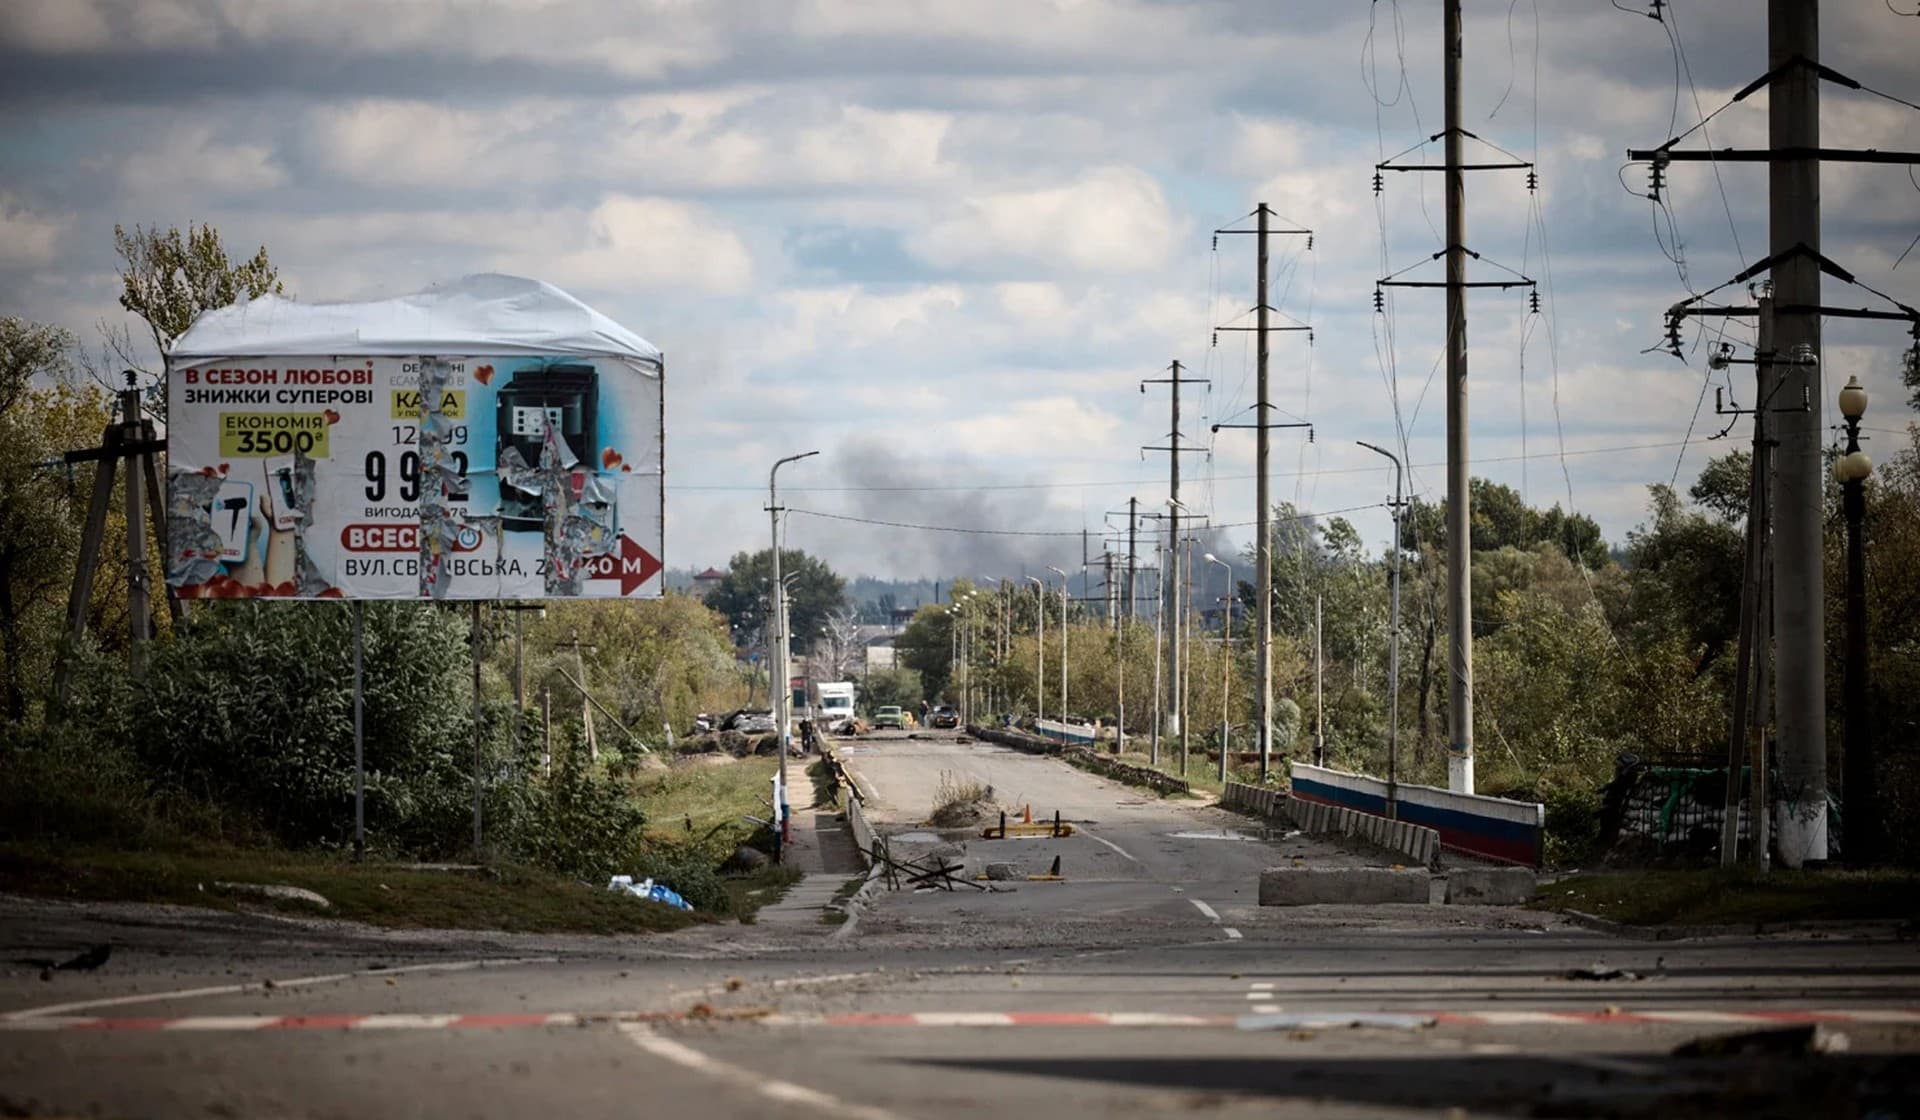 Smoke rises after a shelling in the town of Kupiansk